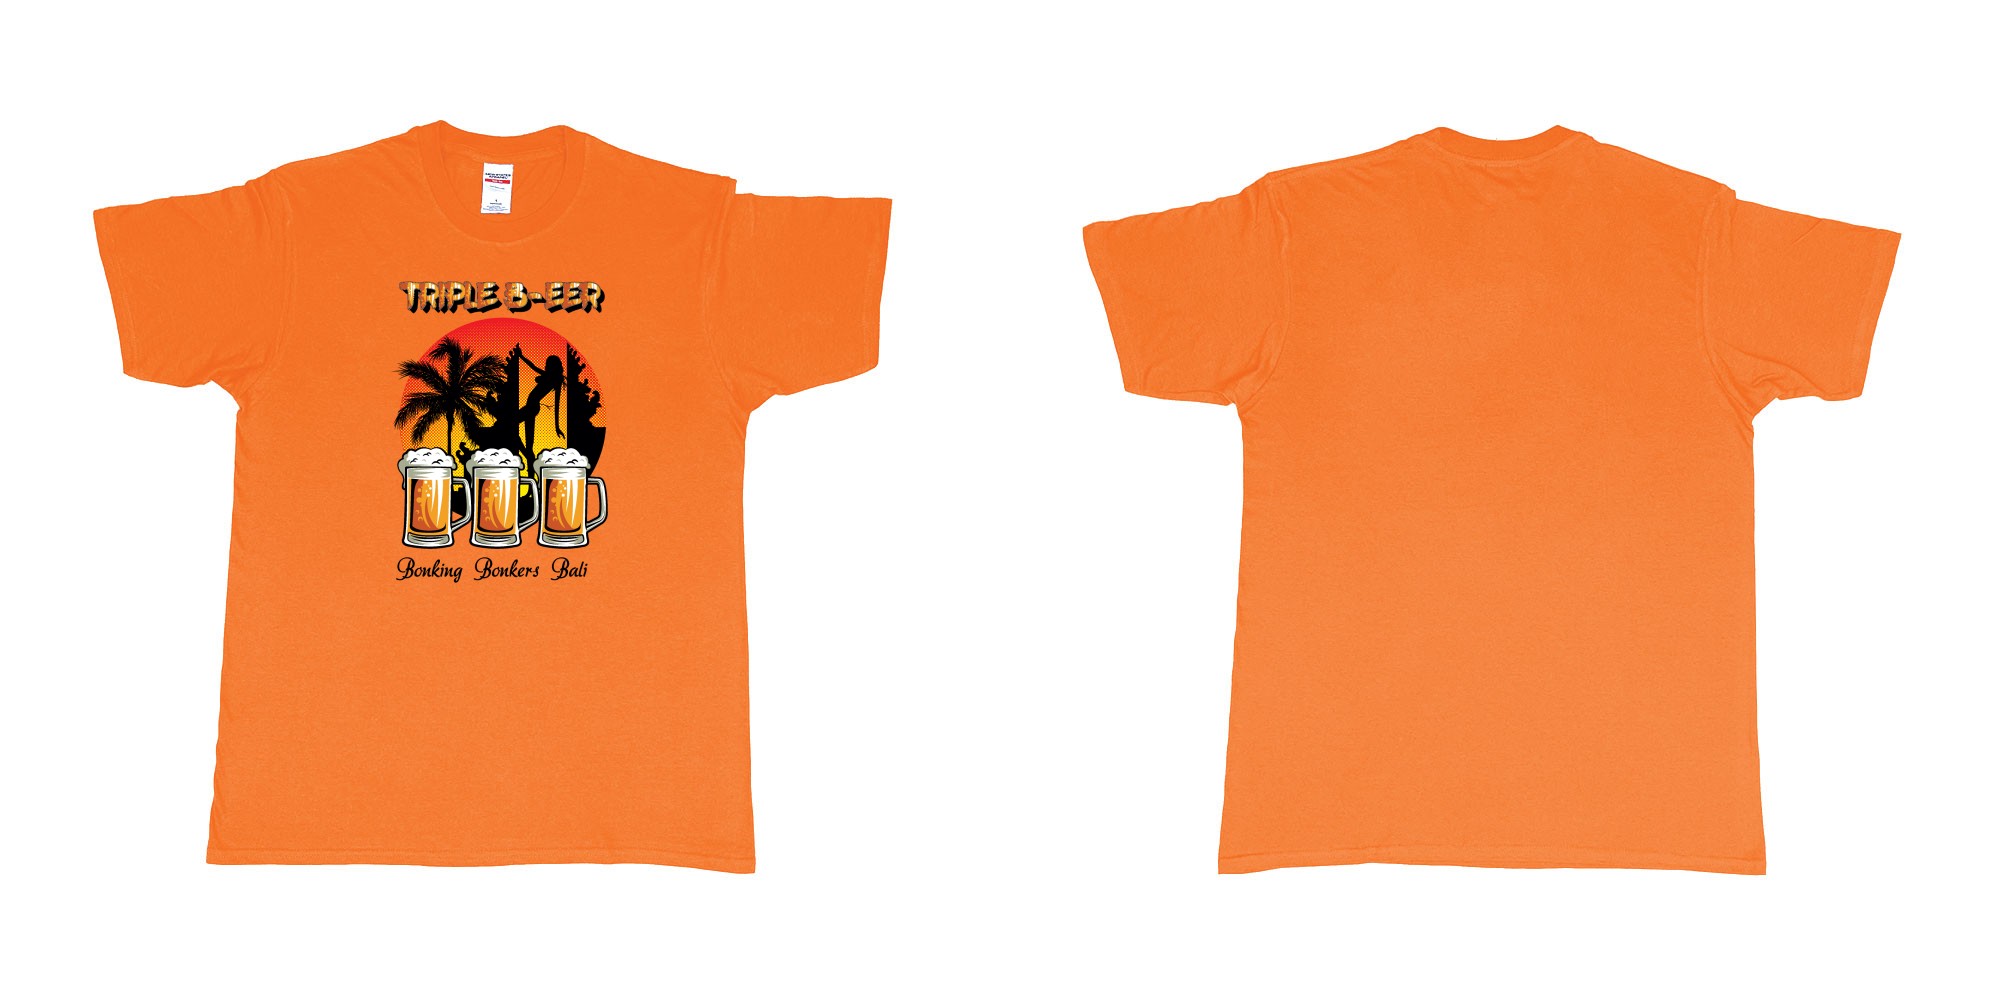 Custom tshirt design triple beer bonking bonkers bali in fabric color orange choice your own text made in Bali by The Pirate Way